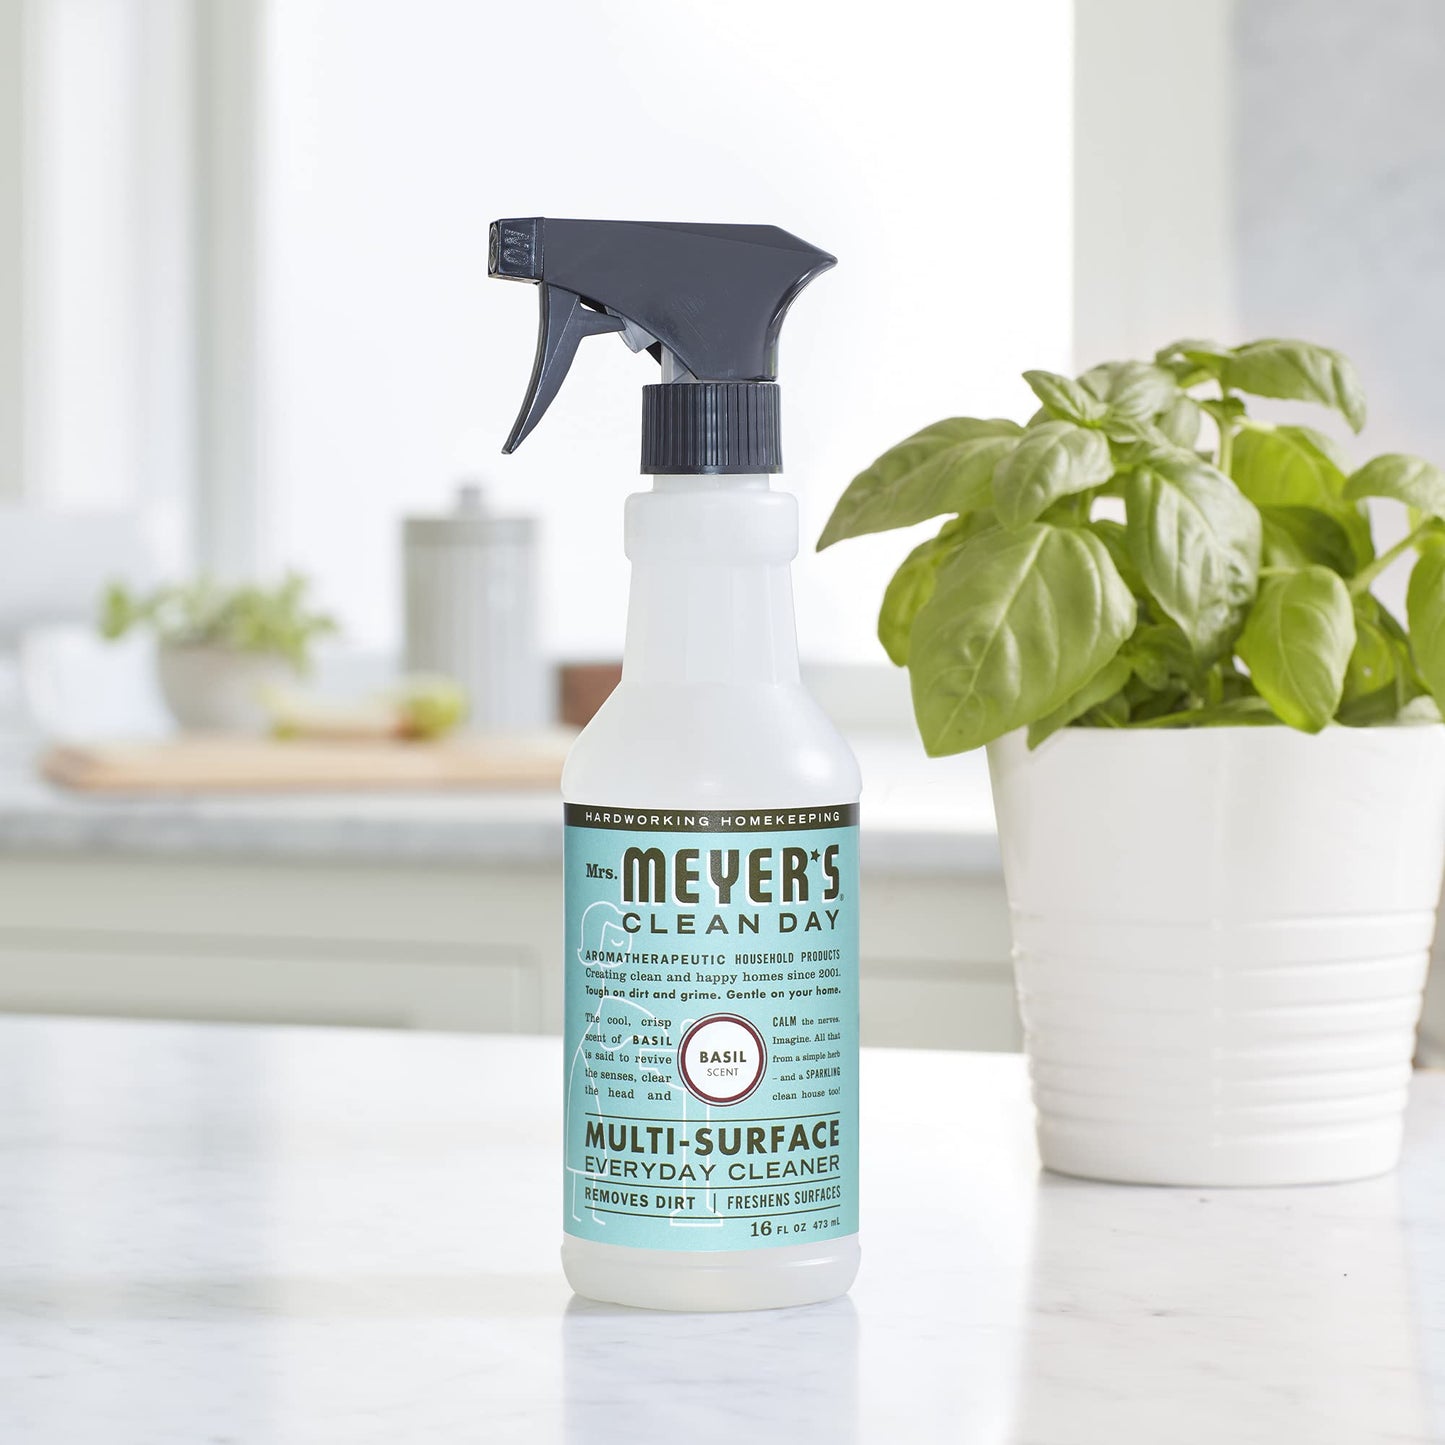 MRS. MEYER'S CLEAN DAY Multi-Surface Cleaner Concentrate, Use to Clean Floors, Tile, Counters, Basil, 32 fl. oz - Pack of 2